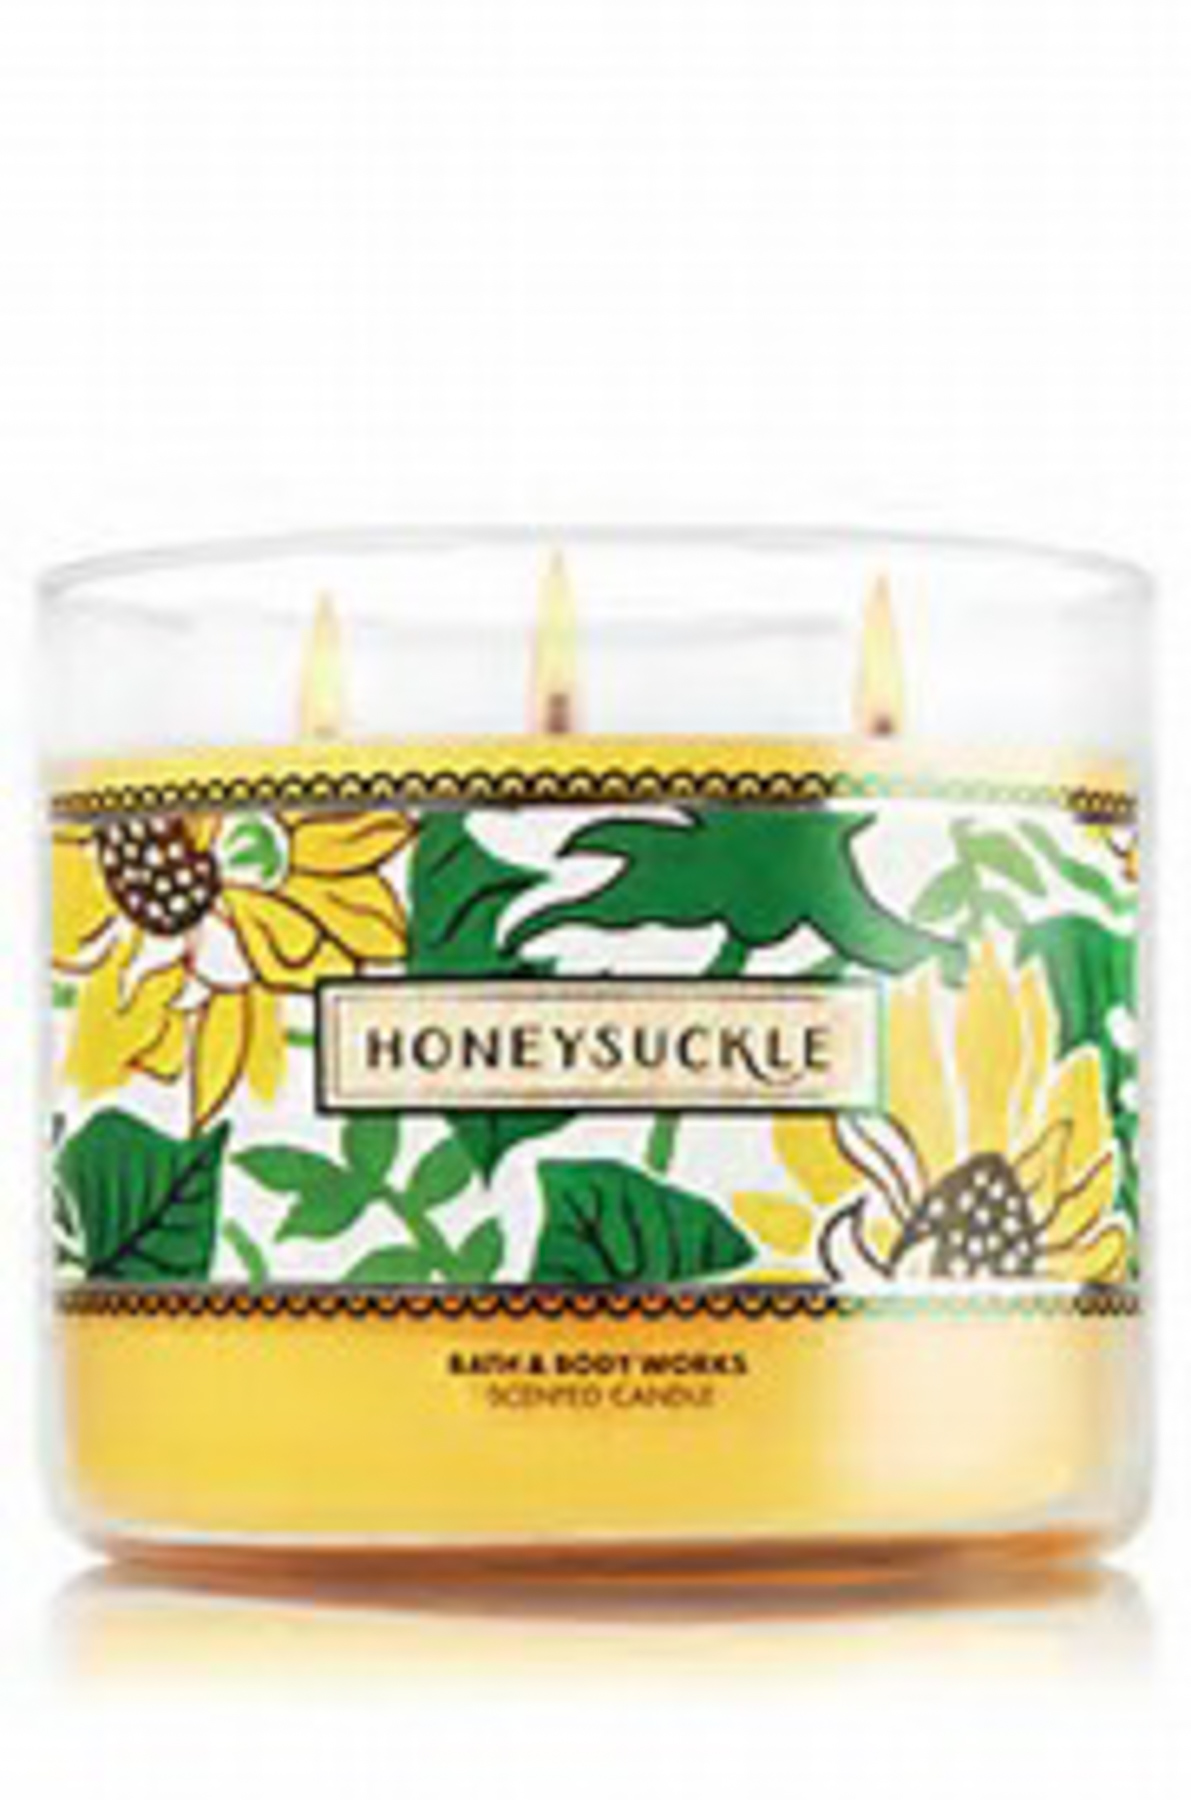 Bath and body works honey suckle candle.jpg